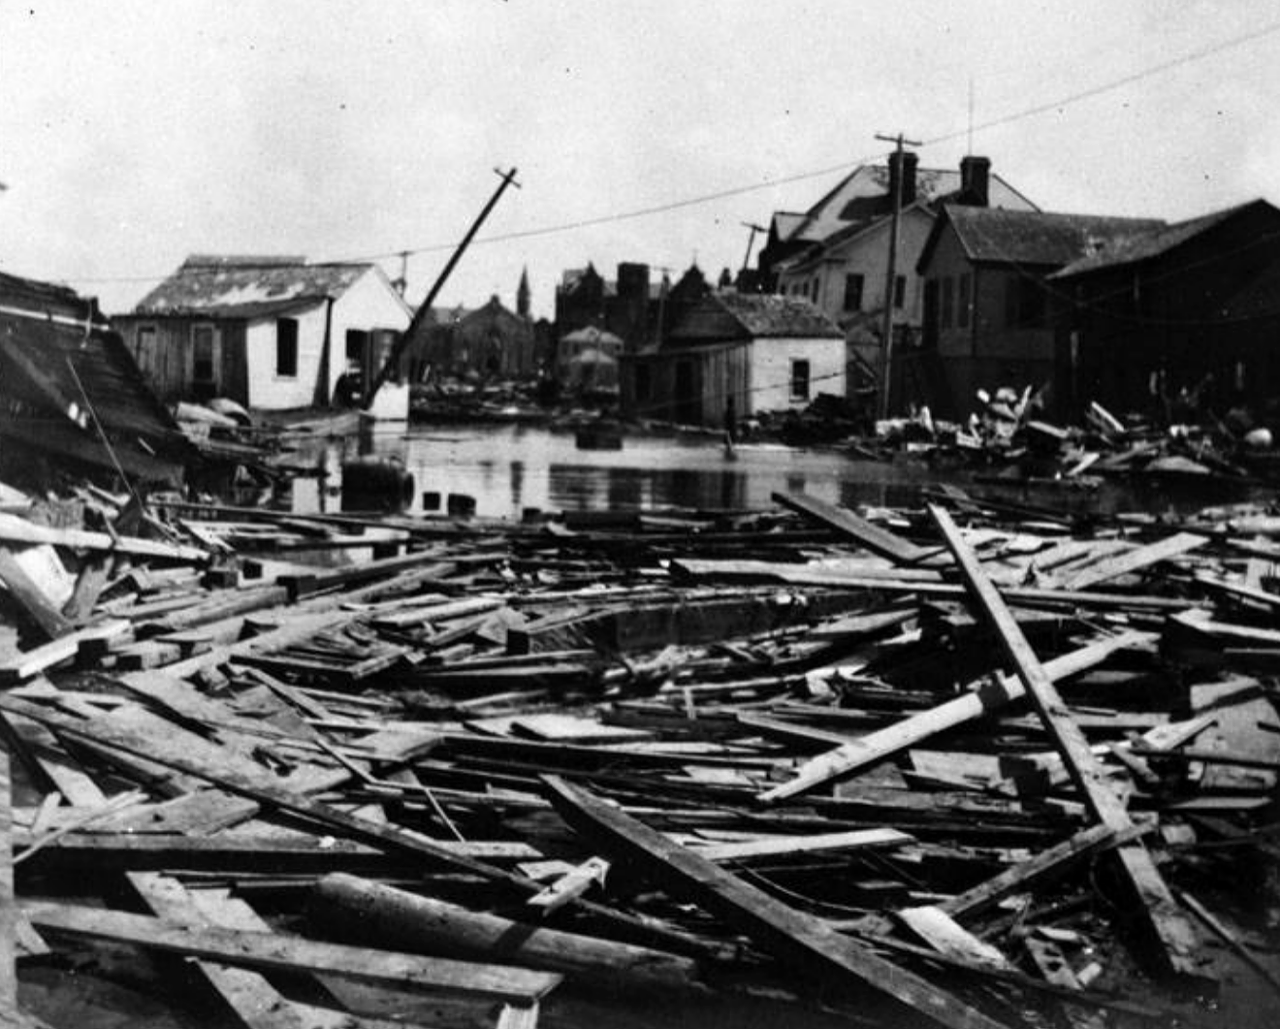 The worst natural disaster in U.S. history took place in Texas.
Galveston residents know that severe weather is all but unavoidable. Residents in the coastal town in 1900 saw major devastation when a Category 4 hurricane hit land on September 8. The storm completely wiped out the island city, bringing winds of 130 to 140 miles per hour and a storm surge of more than 15 feet. When the hurricane finally settled down, more than 8,000 people had died and thousands of buildings were destroyed. The storm left an estimated $700 million  in damages (in today’s currency).
Photo courtesy of San Antonio Conservation Society via UTSA Libraries Special Collections